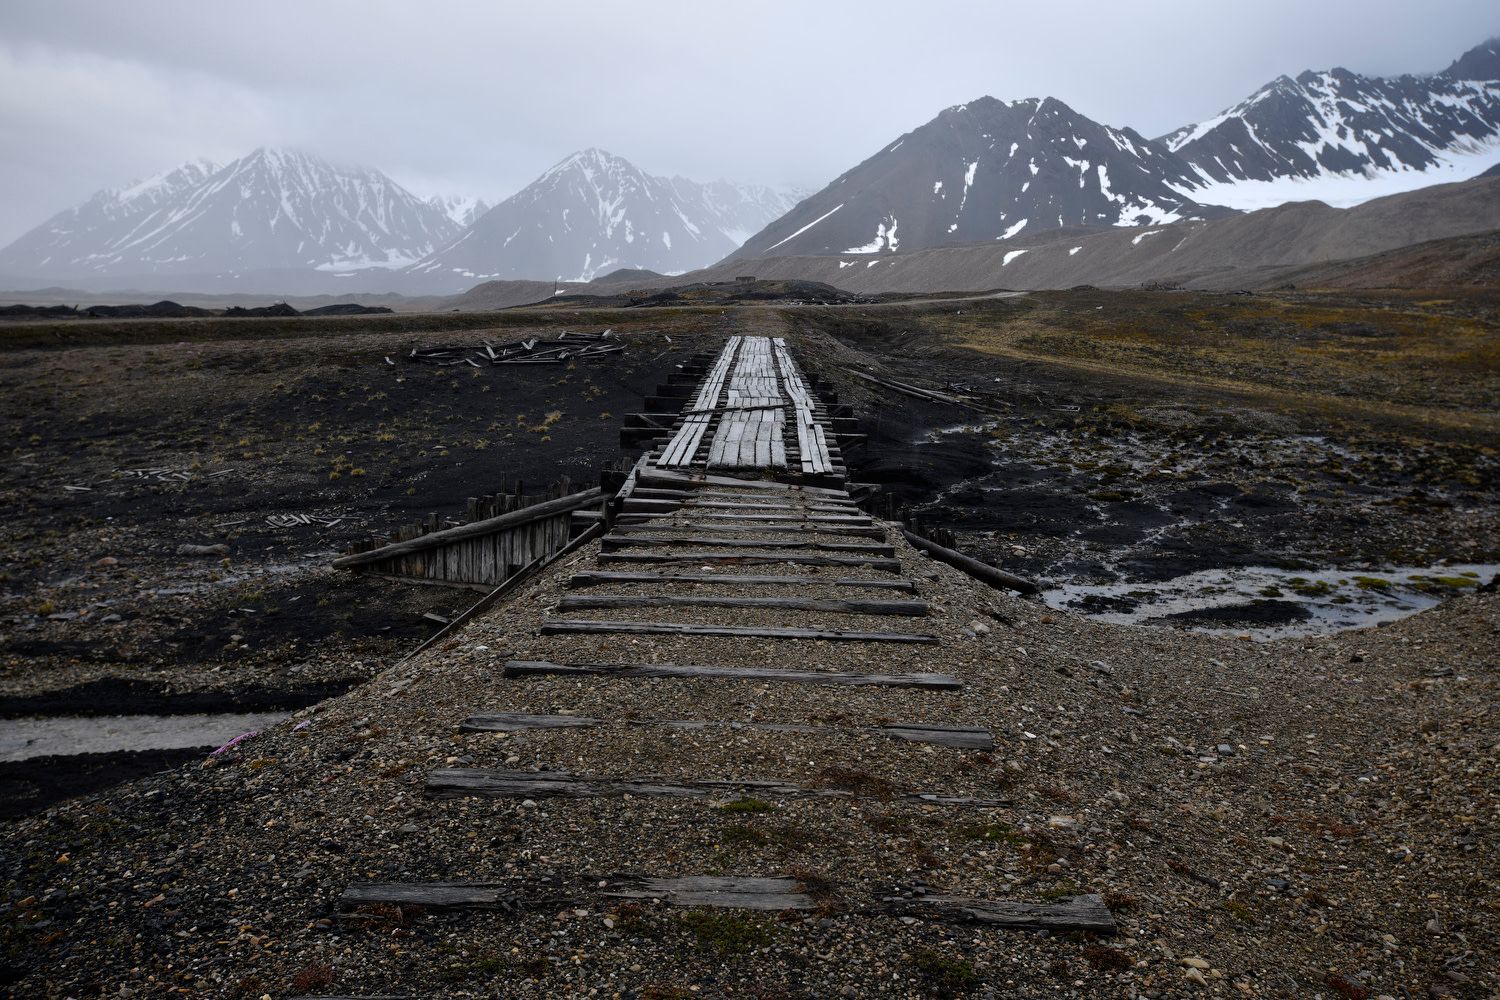 Ny-Ålesund, Svalbard Islands, Norway, July 2018. Remains of the former coal mine that was closed in 1962 after a firedamp explosion killed 21 miners. It was replaced in 1966 with an international research center on the Arctic and the environment. The village, with a population of 30 to 150, has an airport, a post office, a gift shop and a history museum.